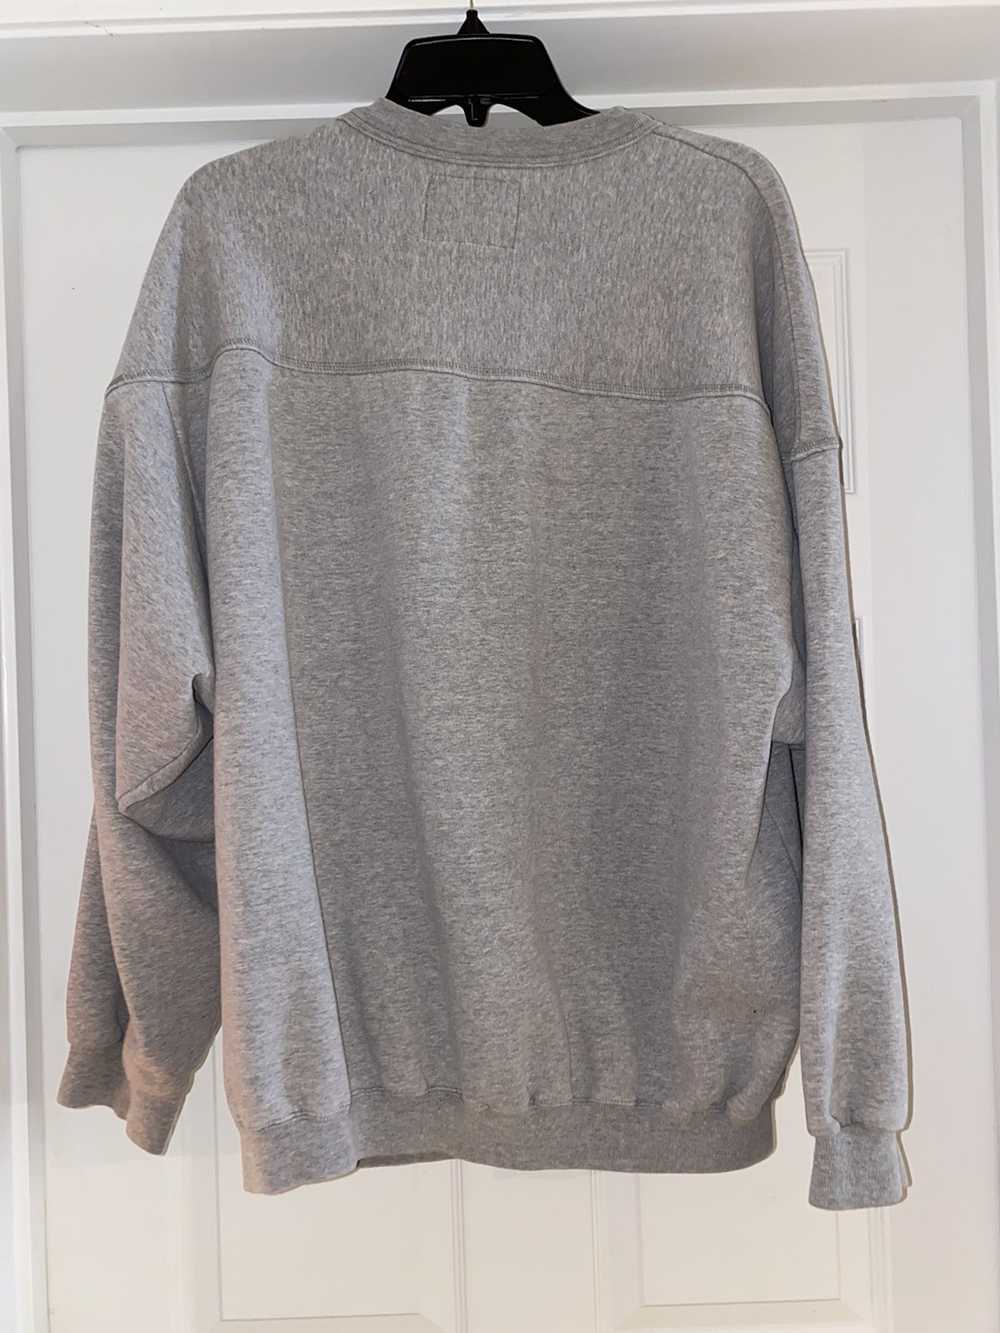 Guess Vintage Guess grey crew neck - image 3